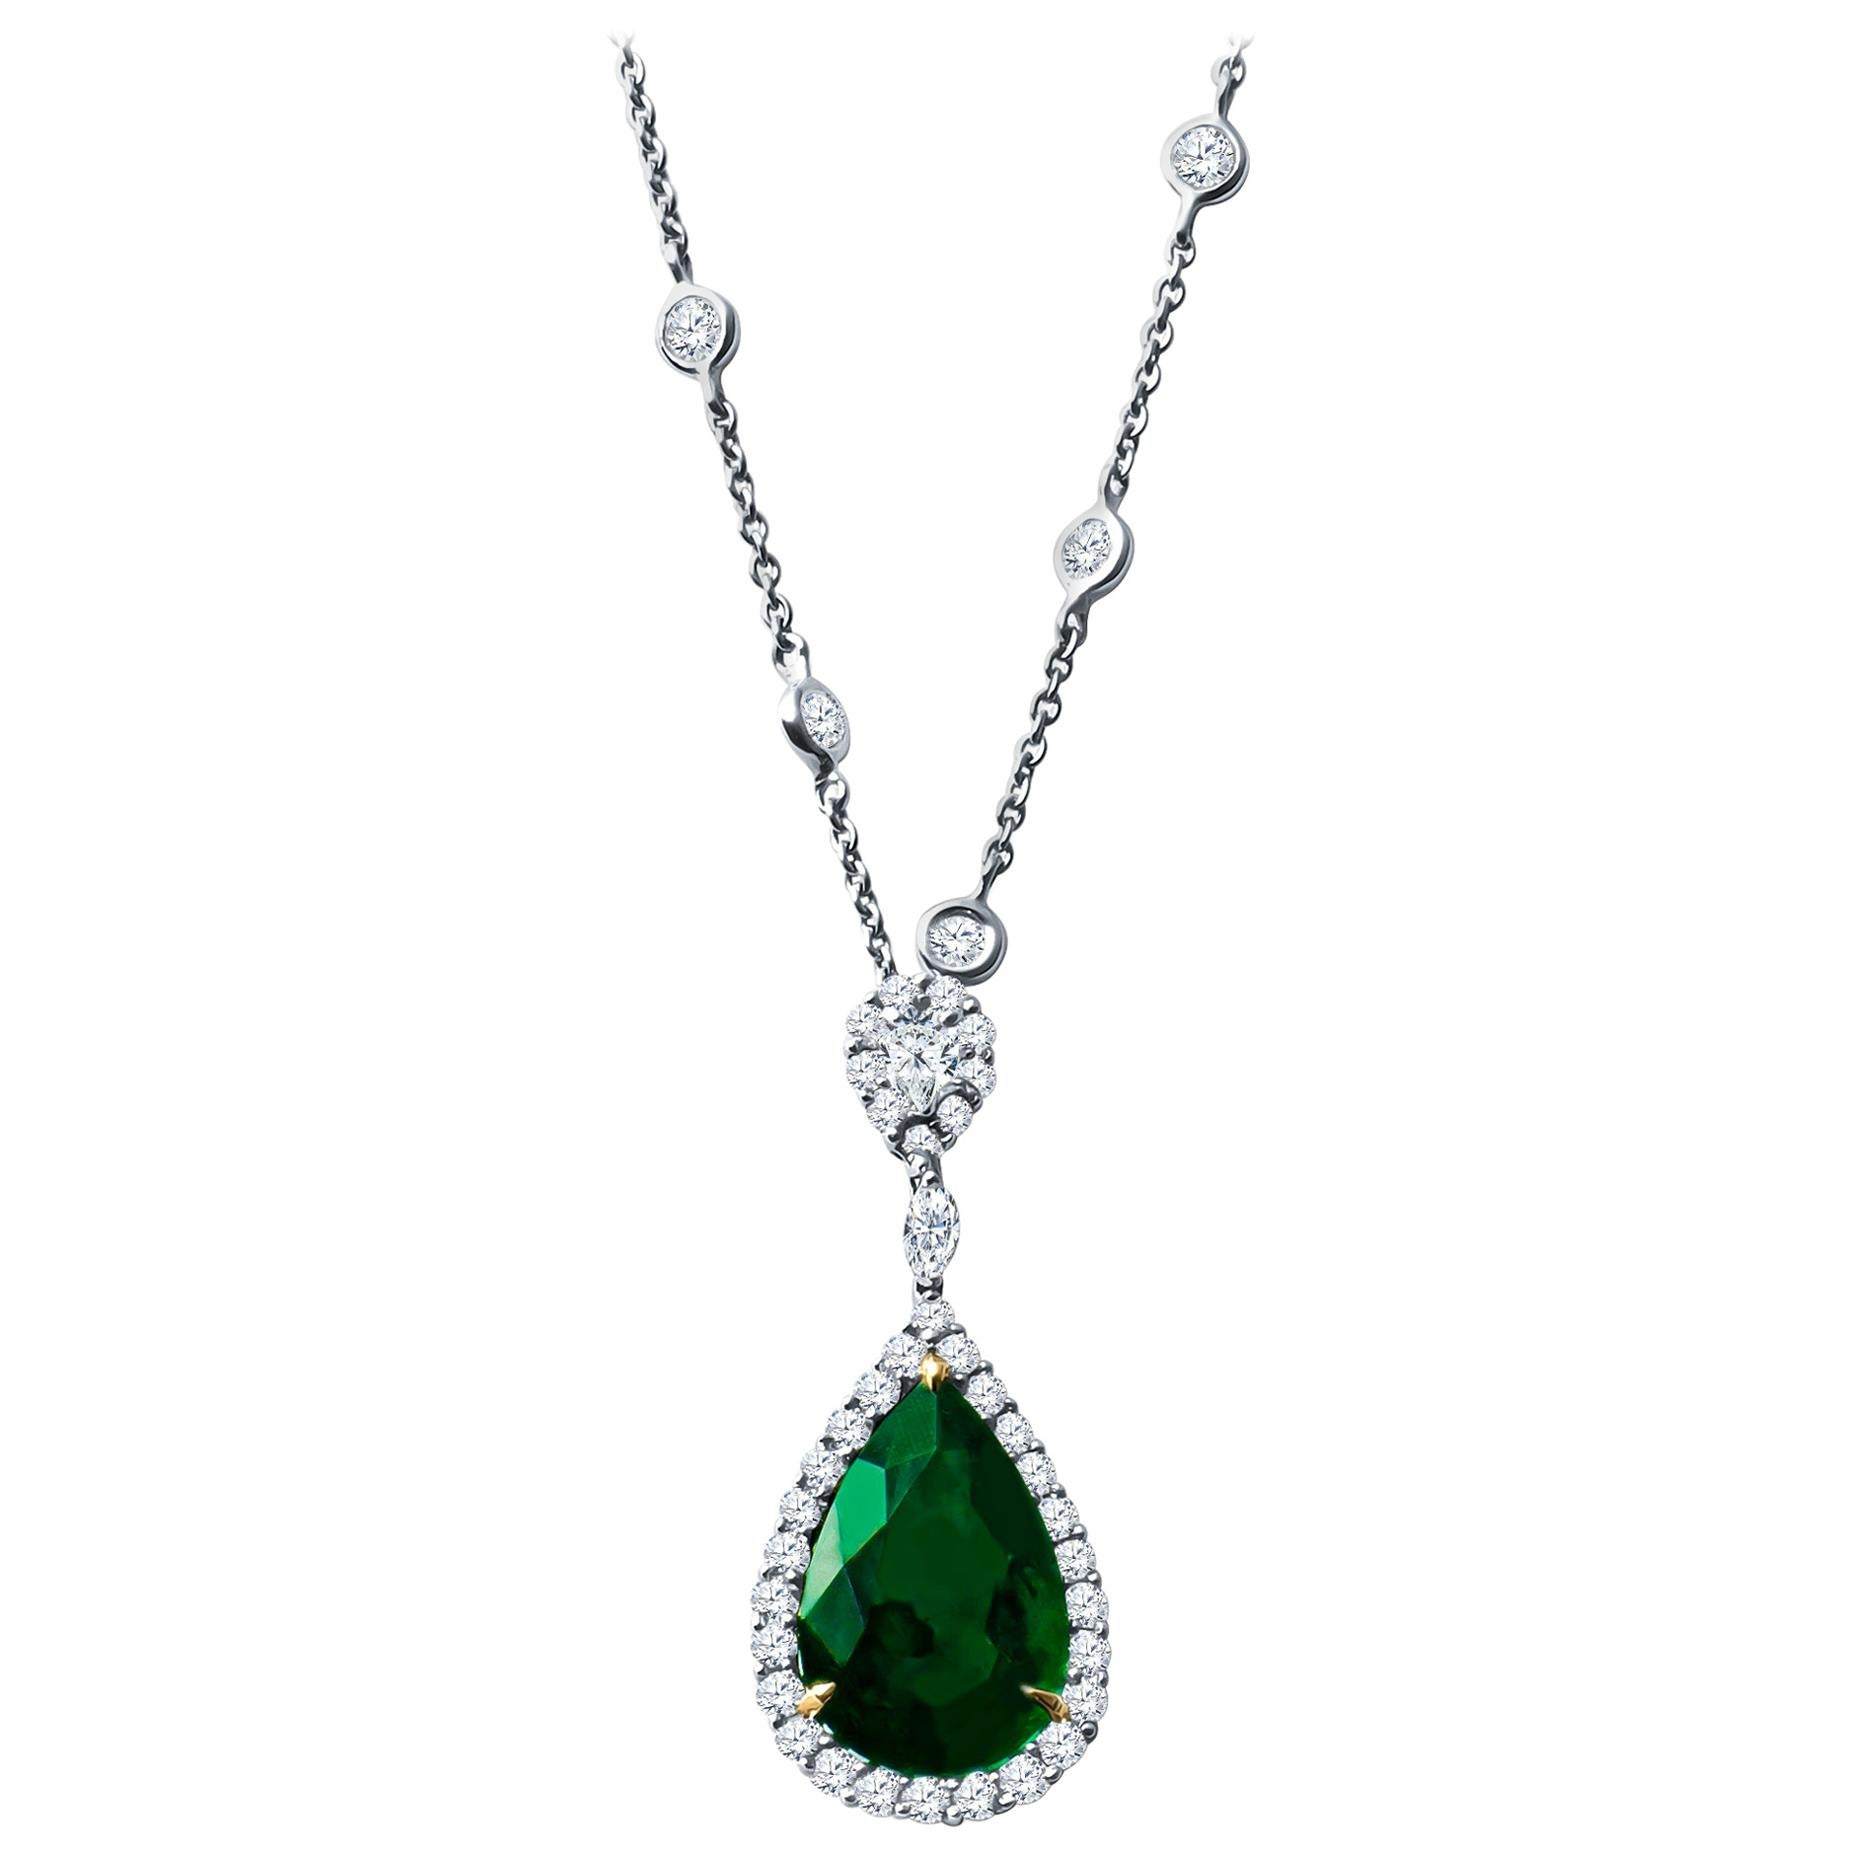 6.75 Carat Pear Shape Emerald and 3.82 Carat Round Diamond by the Yard Necklace